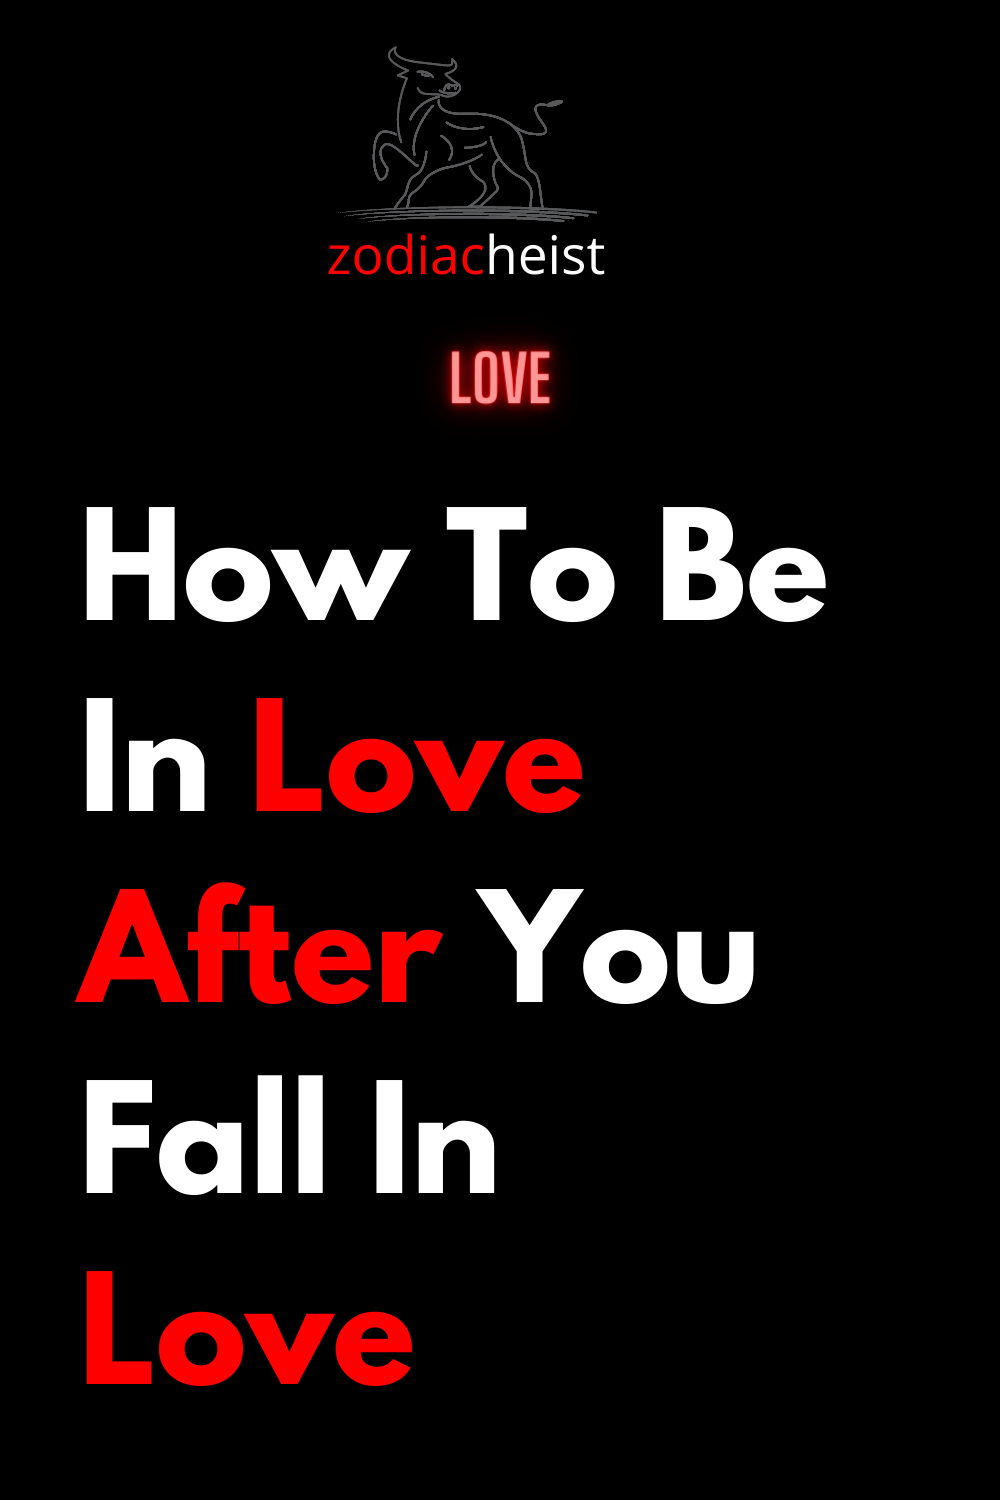 How To Be In Love After You Fall In Love